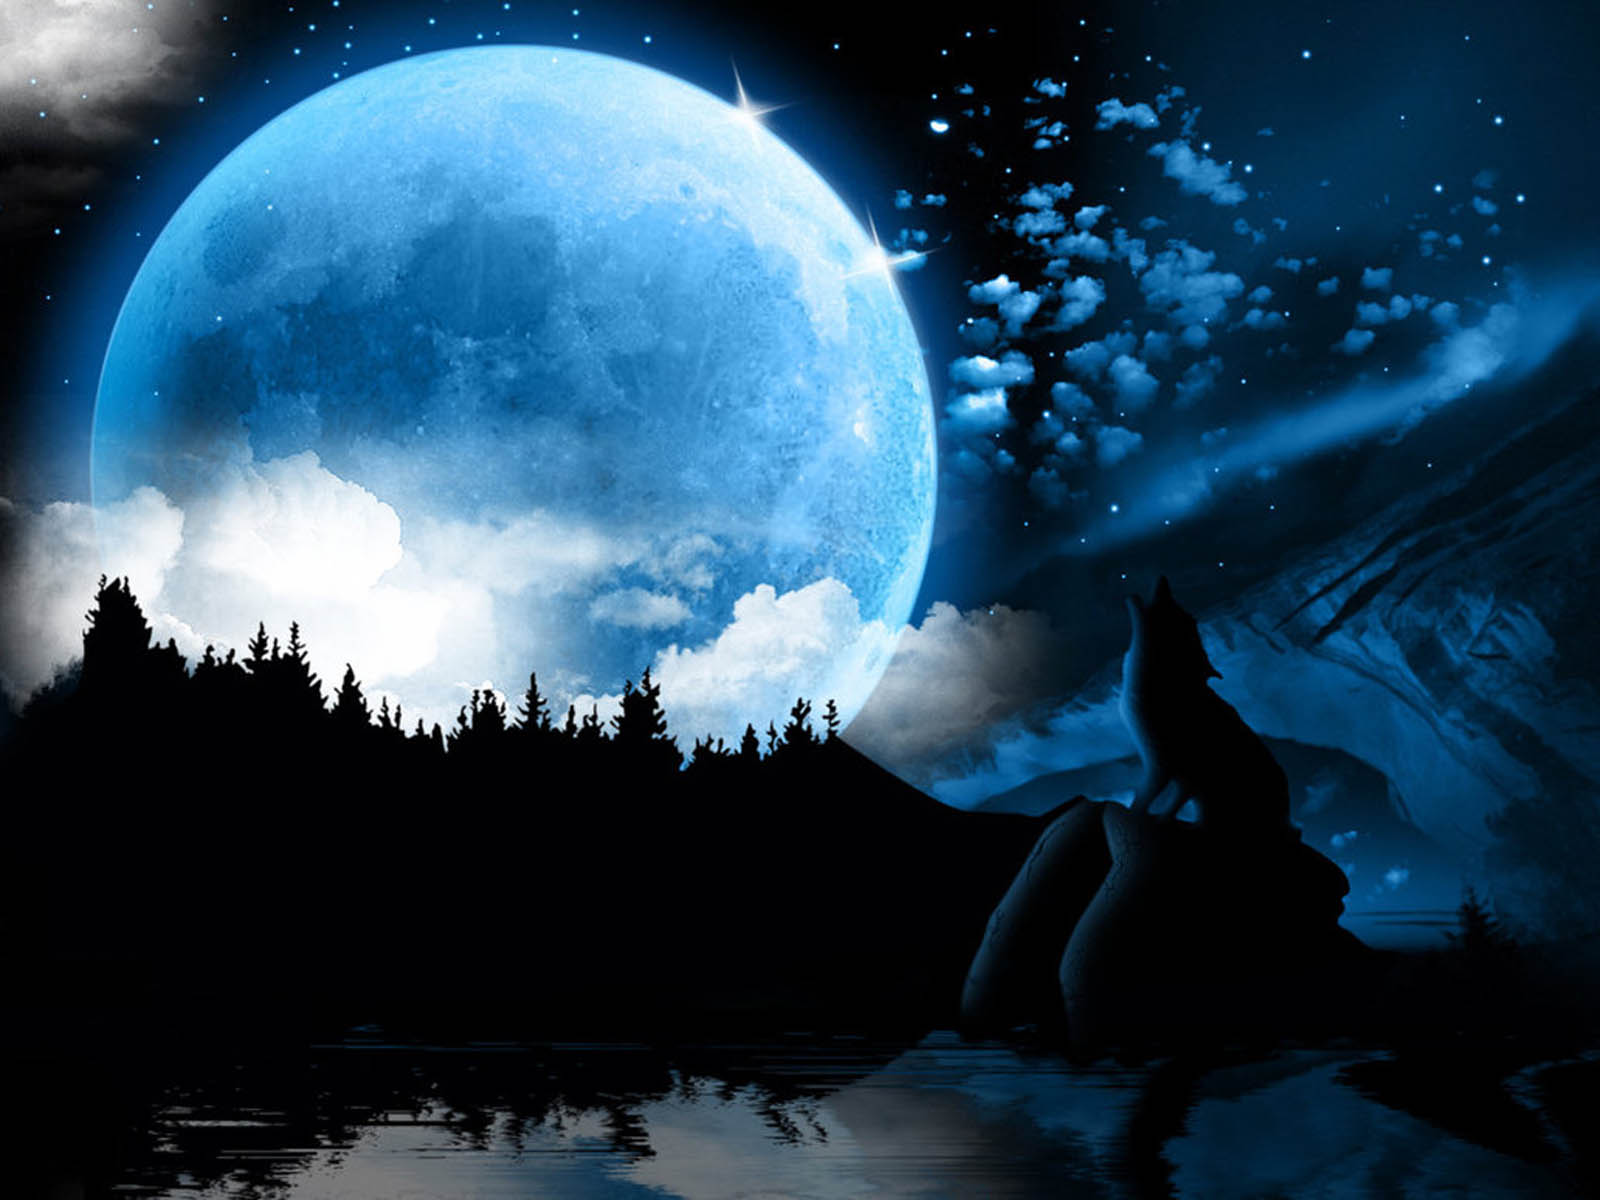 Tag Moon Fantasy Wallpaper Background Paos Image And Pictures